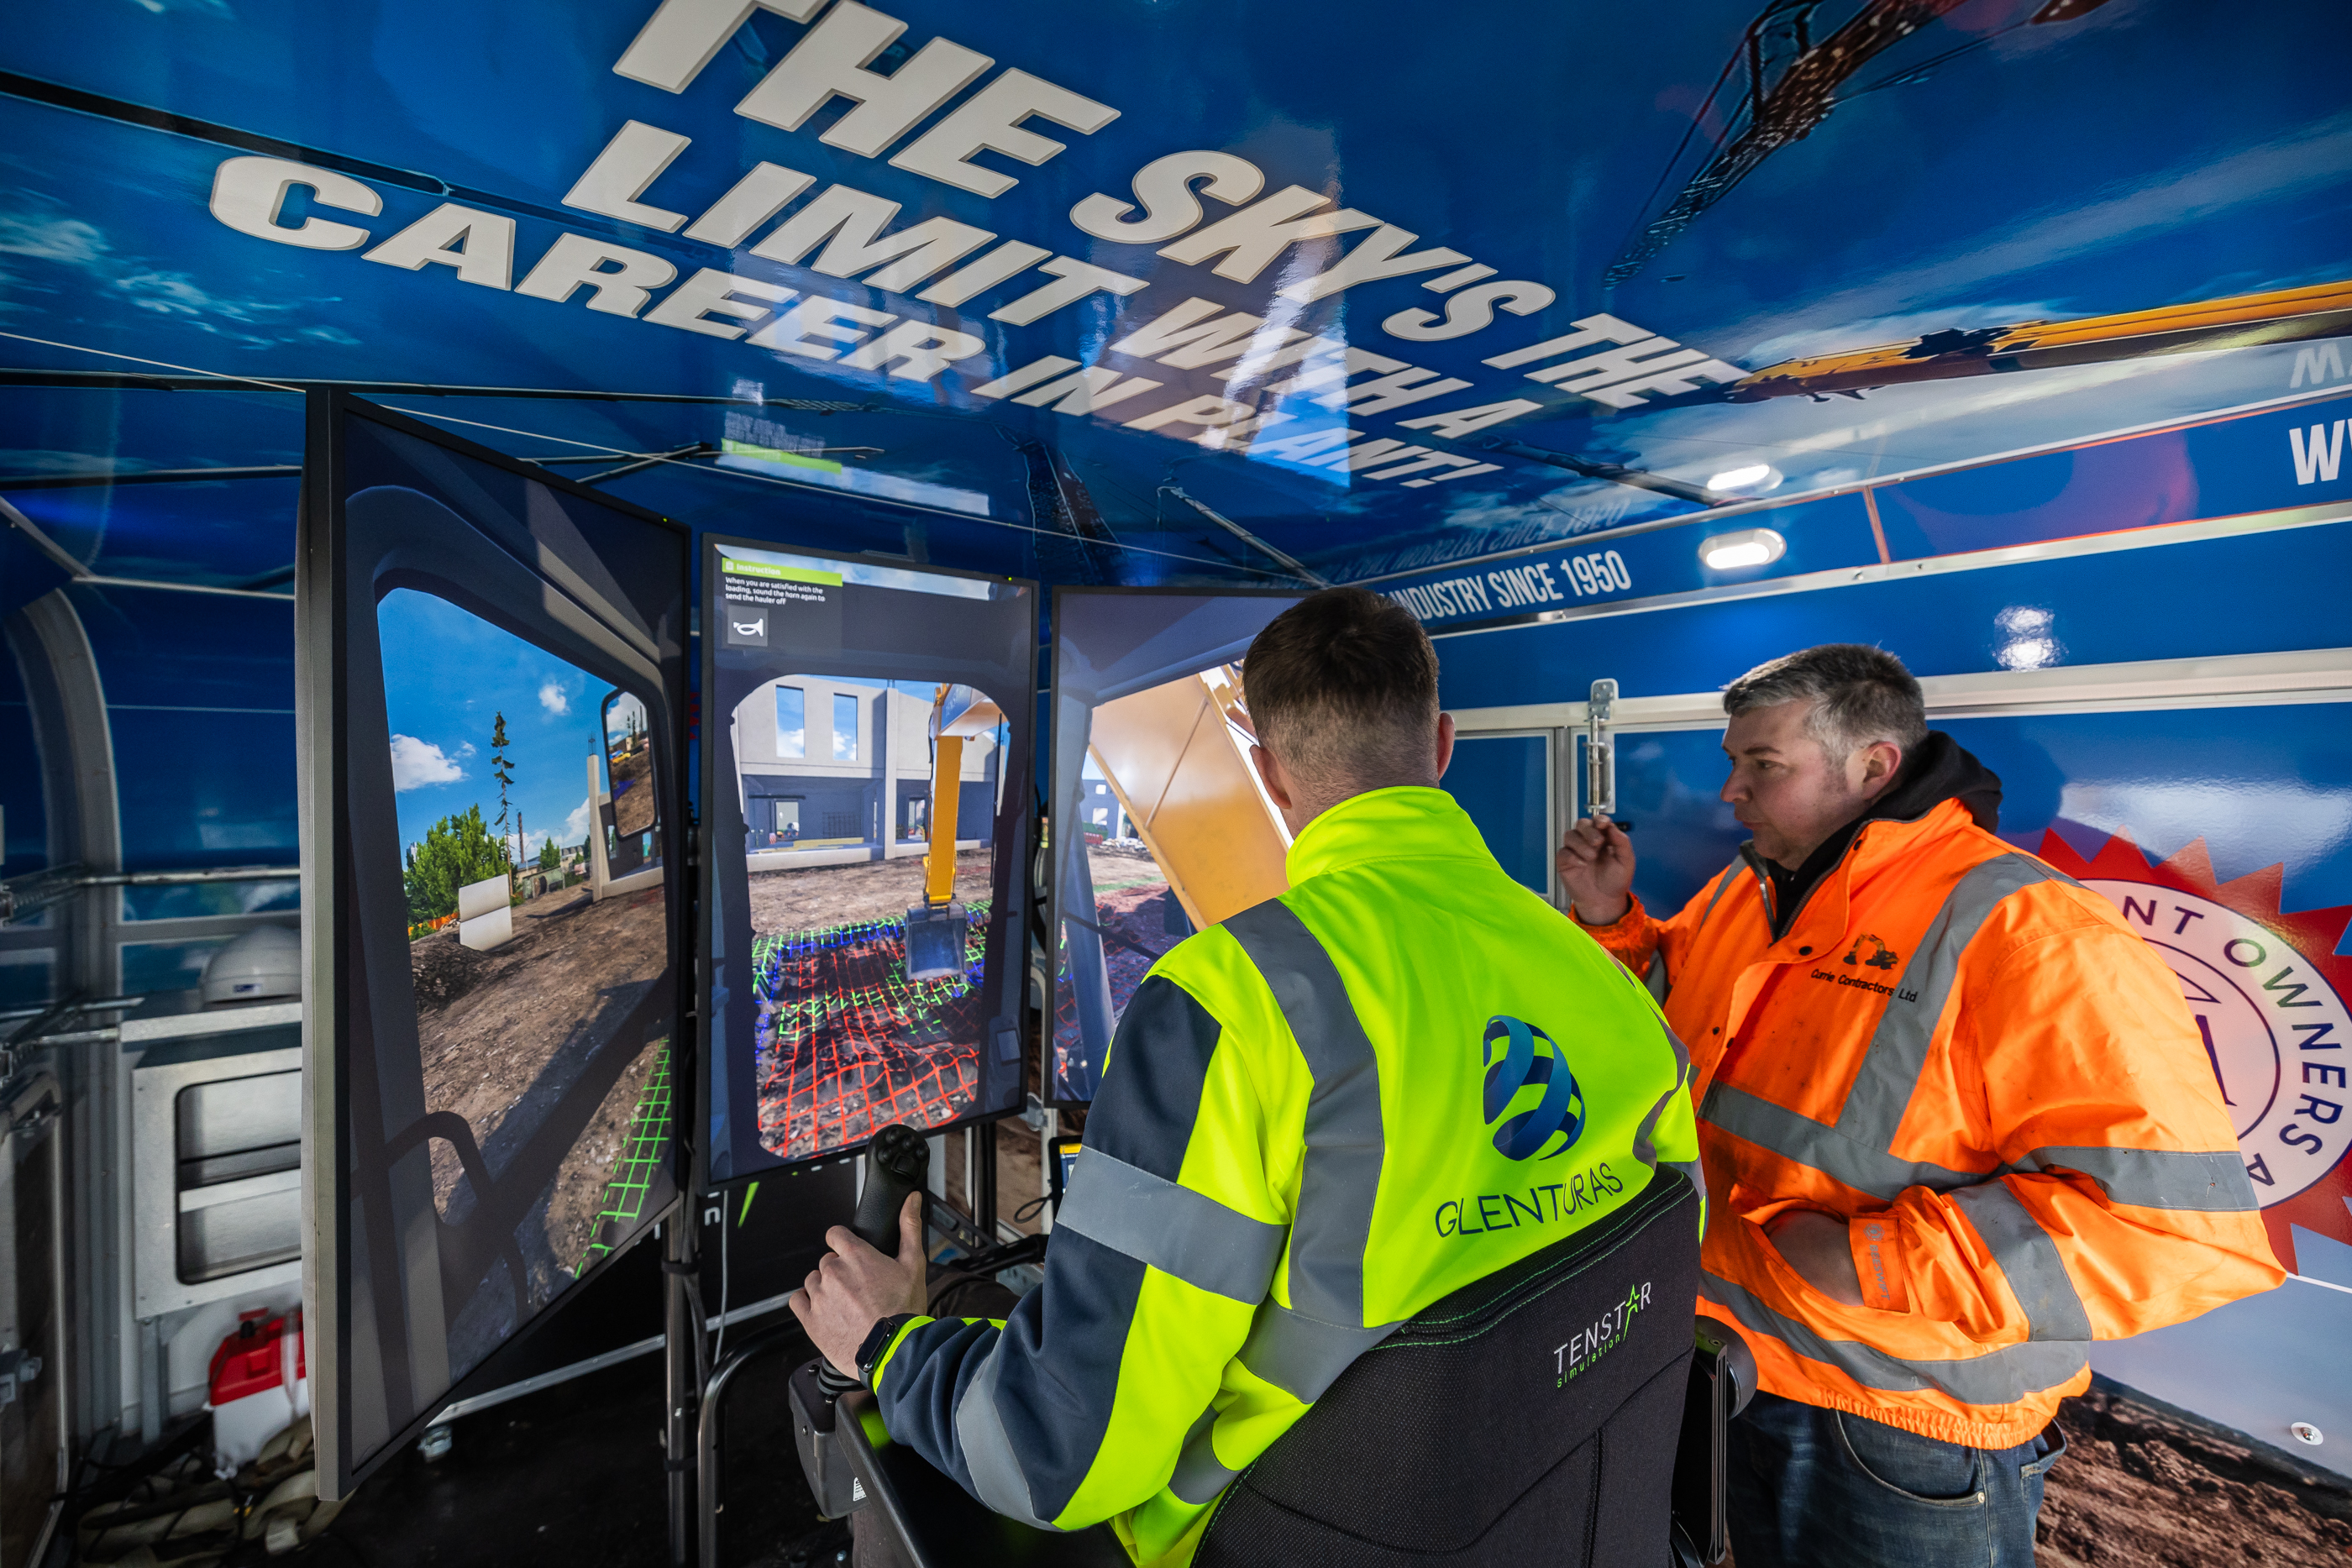 Simulator to inspire young people to enter and upskill plant industry hits the road